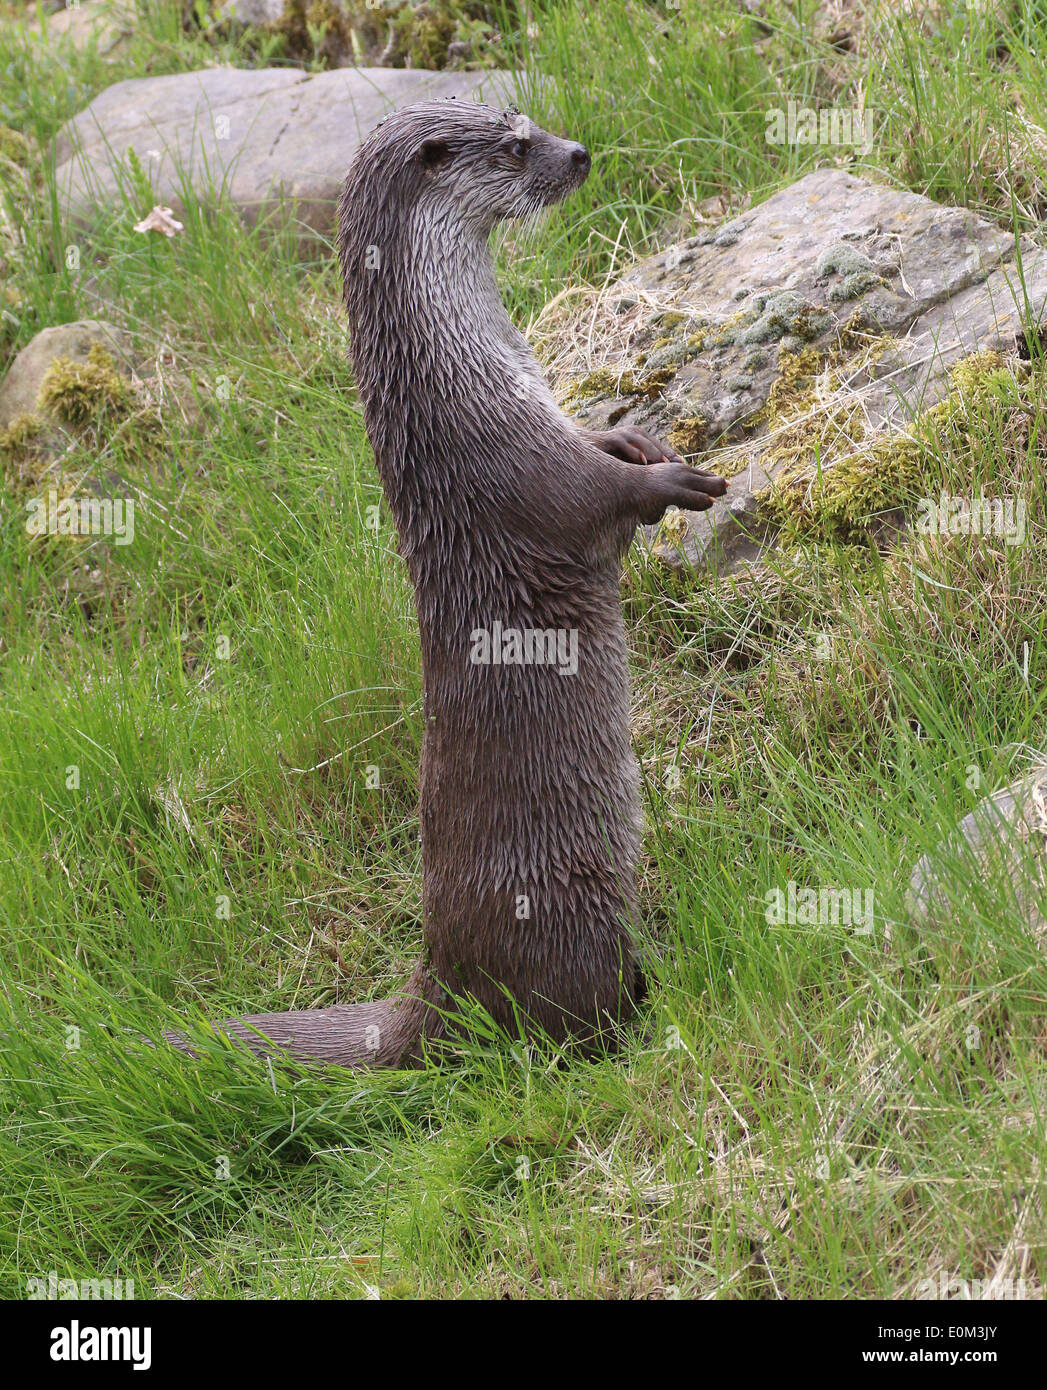 Close-up of a  European otter (Lutra lutra) standing on two legs Stock Photo